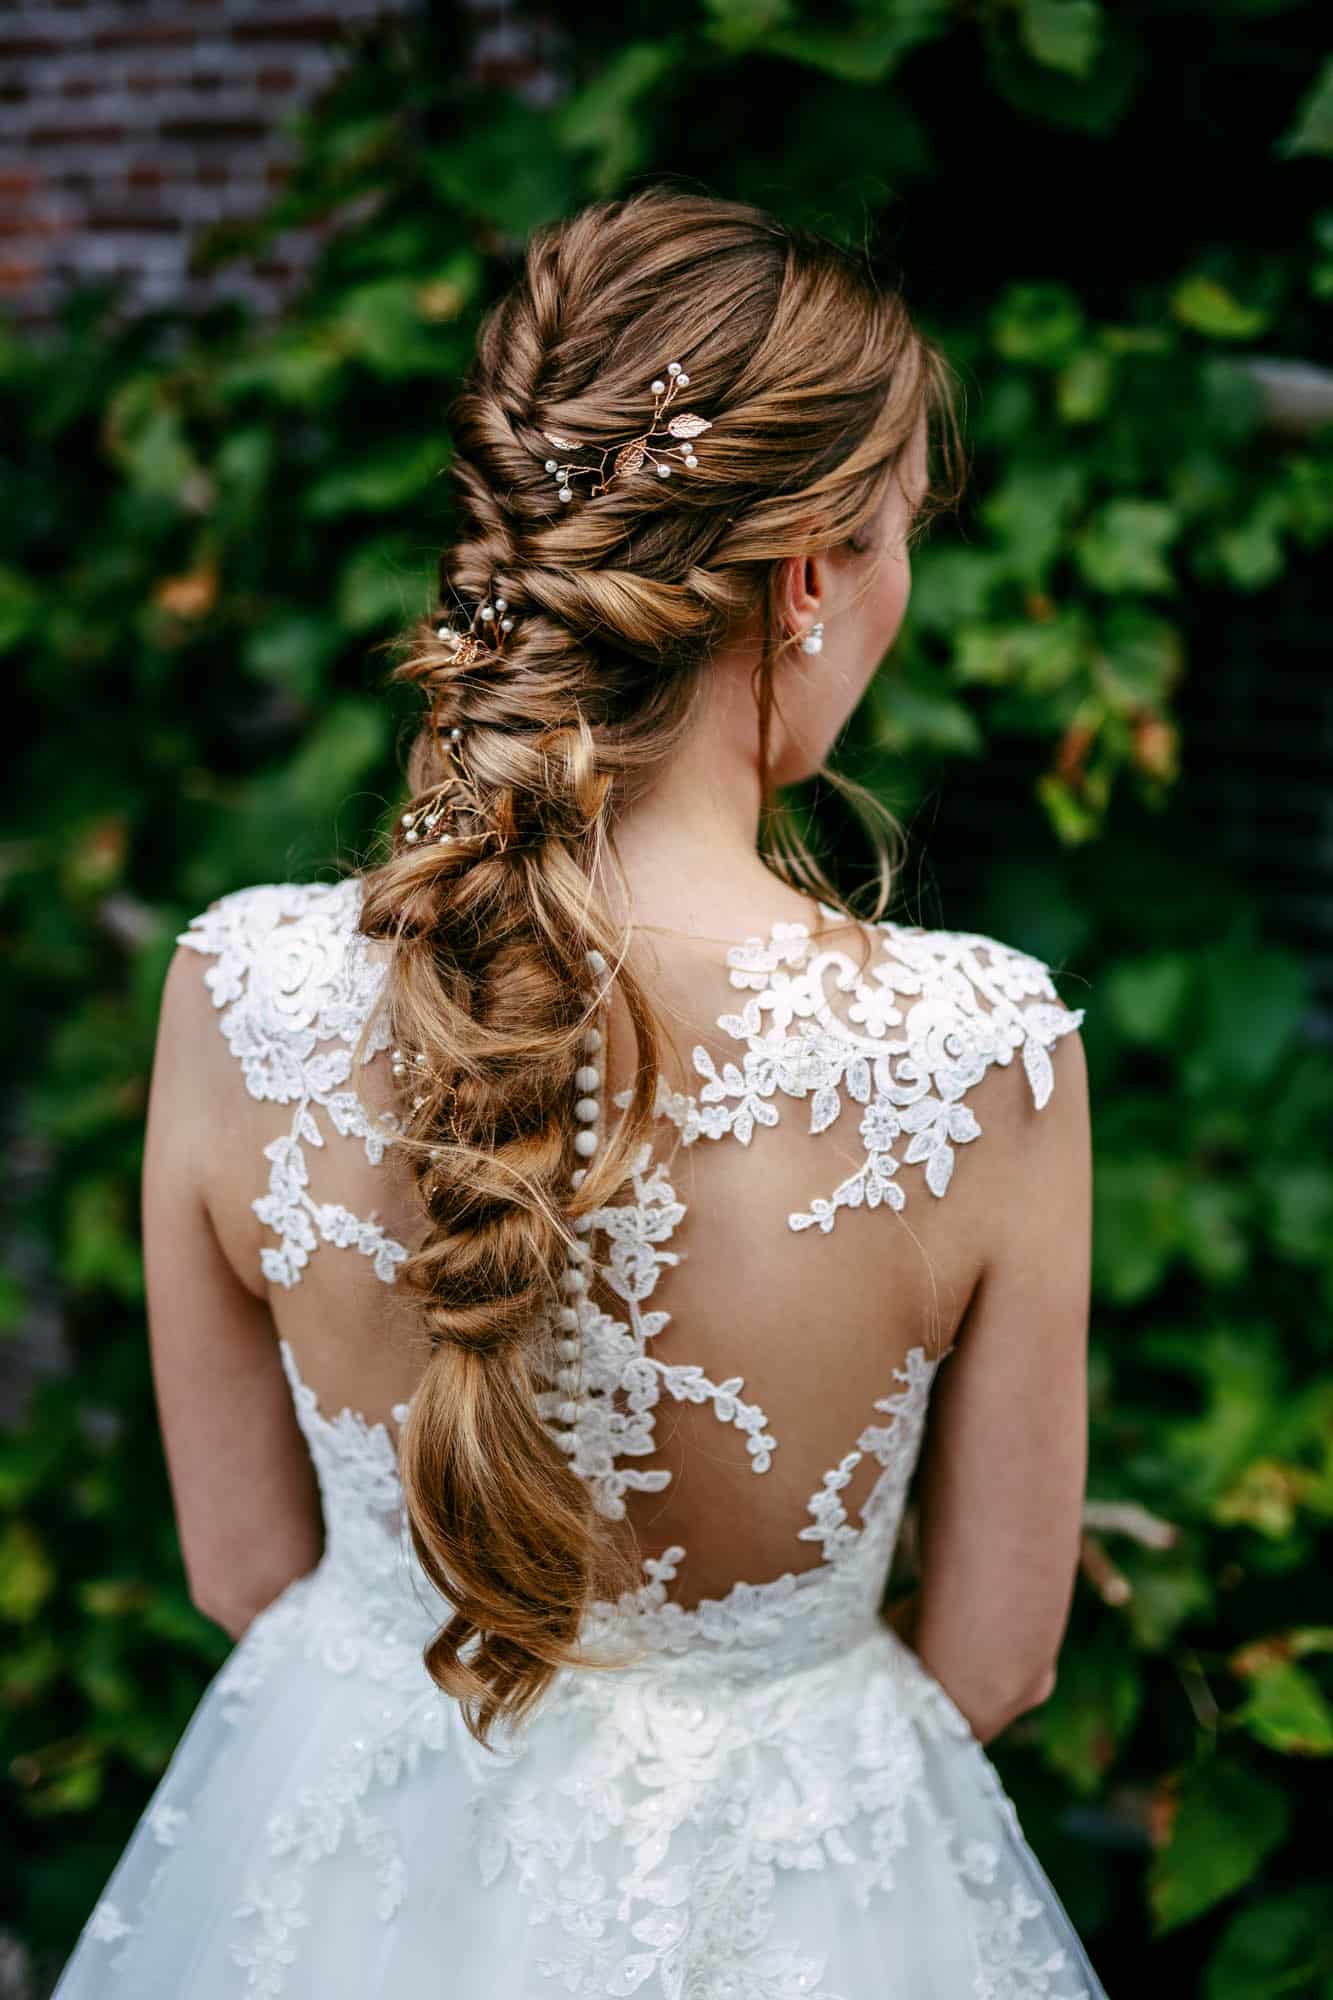 A bride in a white wedding dress with a braided hairstyle with beautiful bridal hairstyles.